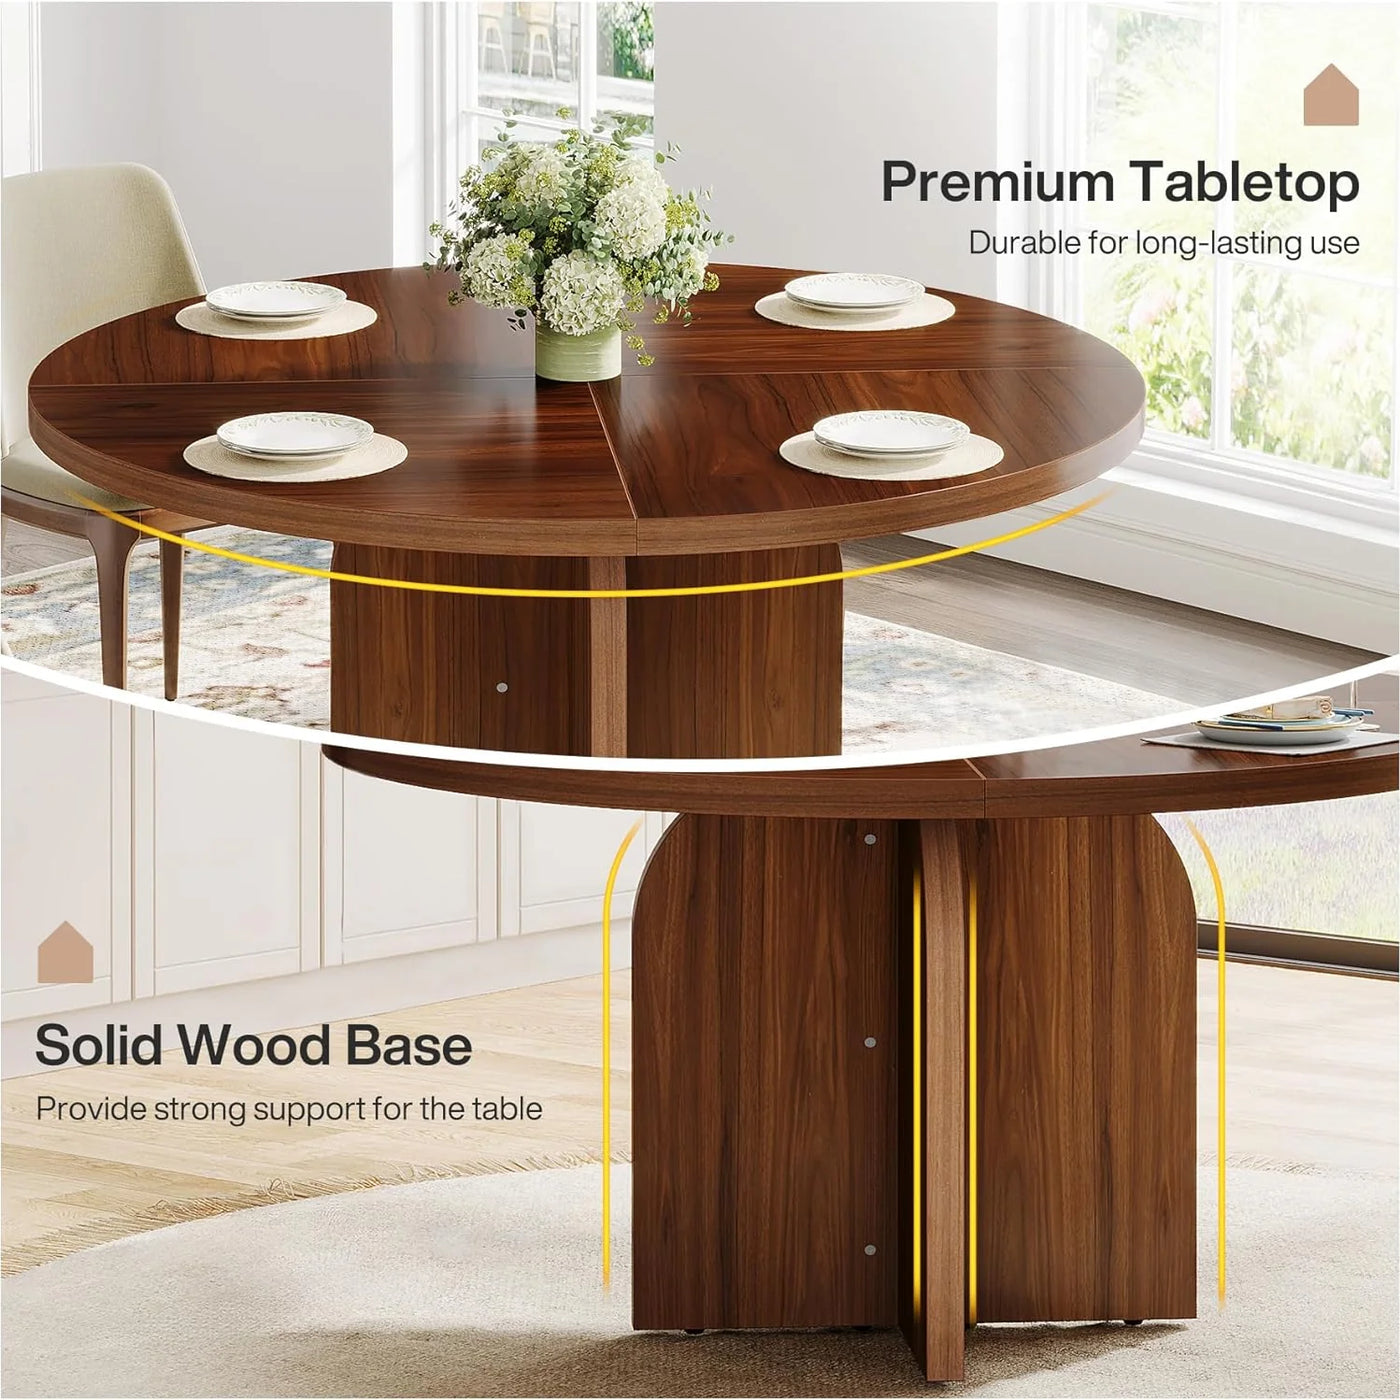 Jean 47-Inch Circular Dining Table | Wooden Round Kitchen Table for 4-6